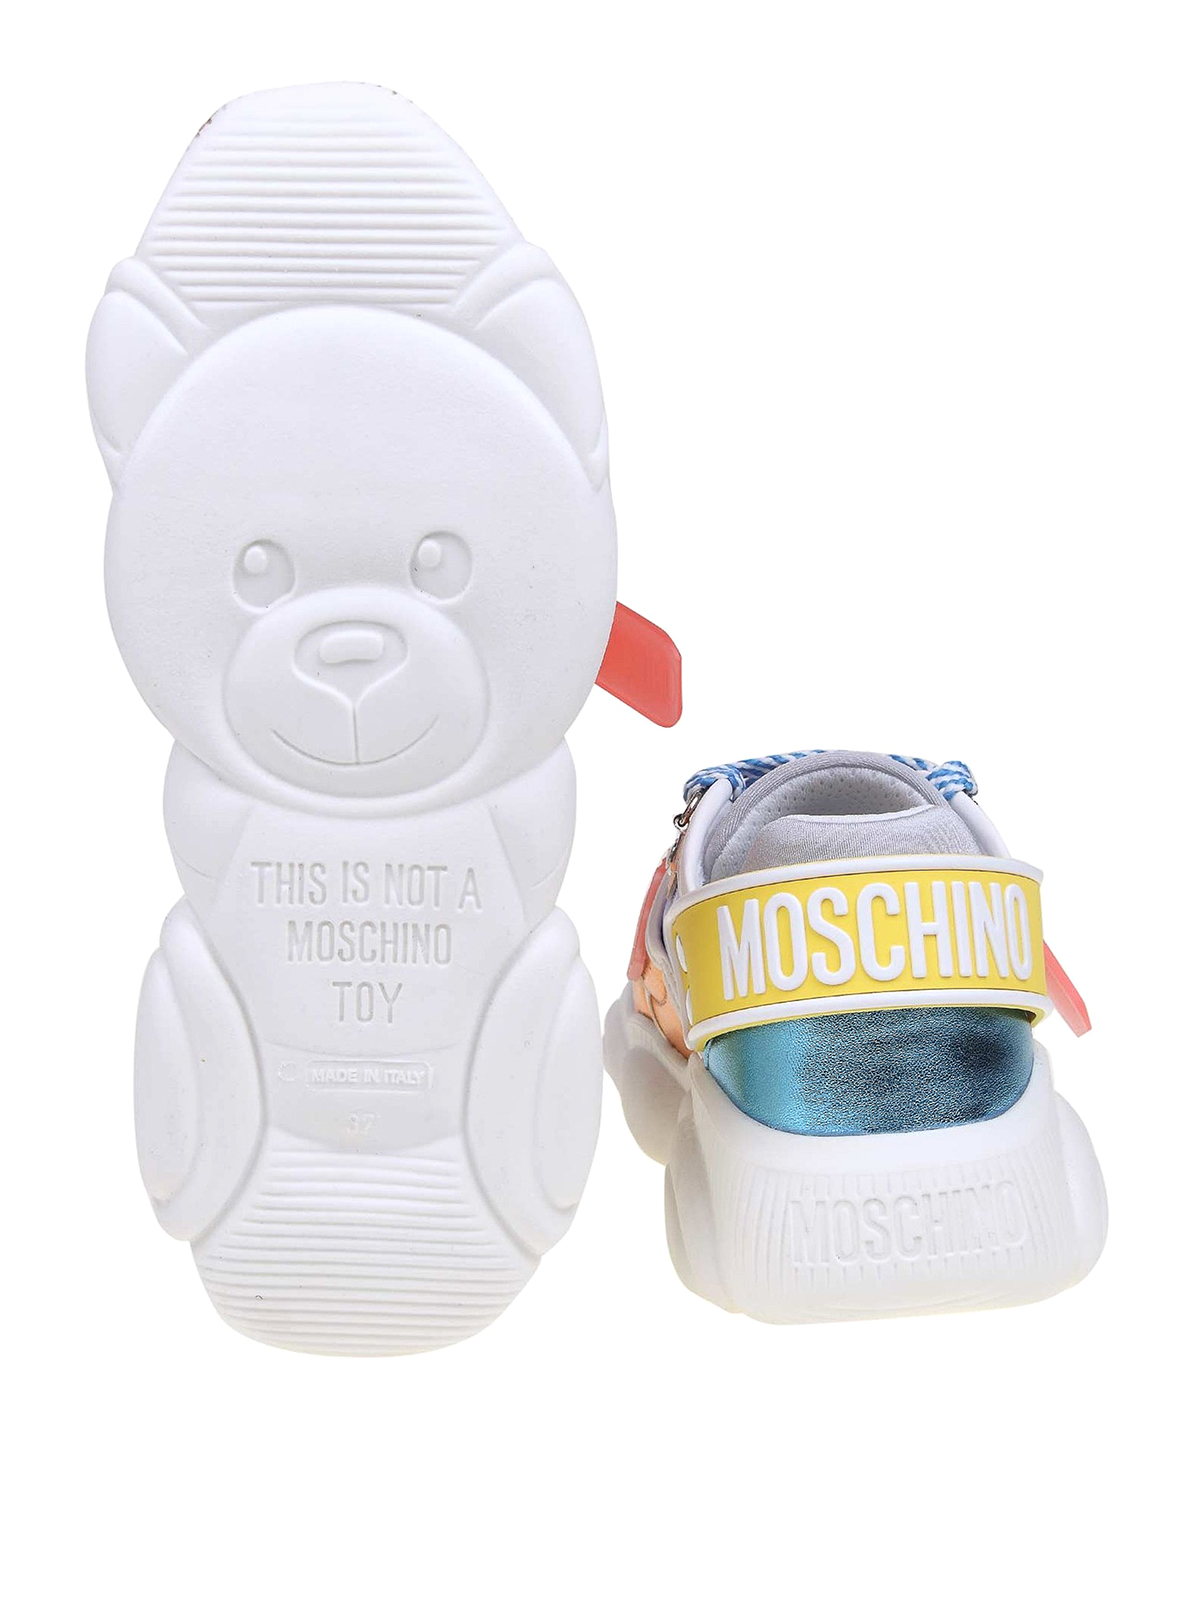 Andere plaatsen koppeling Medic Trainers Moschino - Teddy laminated sneakers - MA15133G0AMC165A